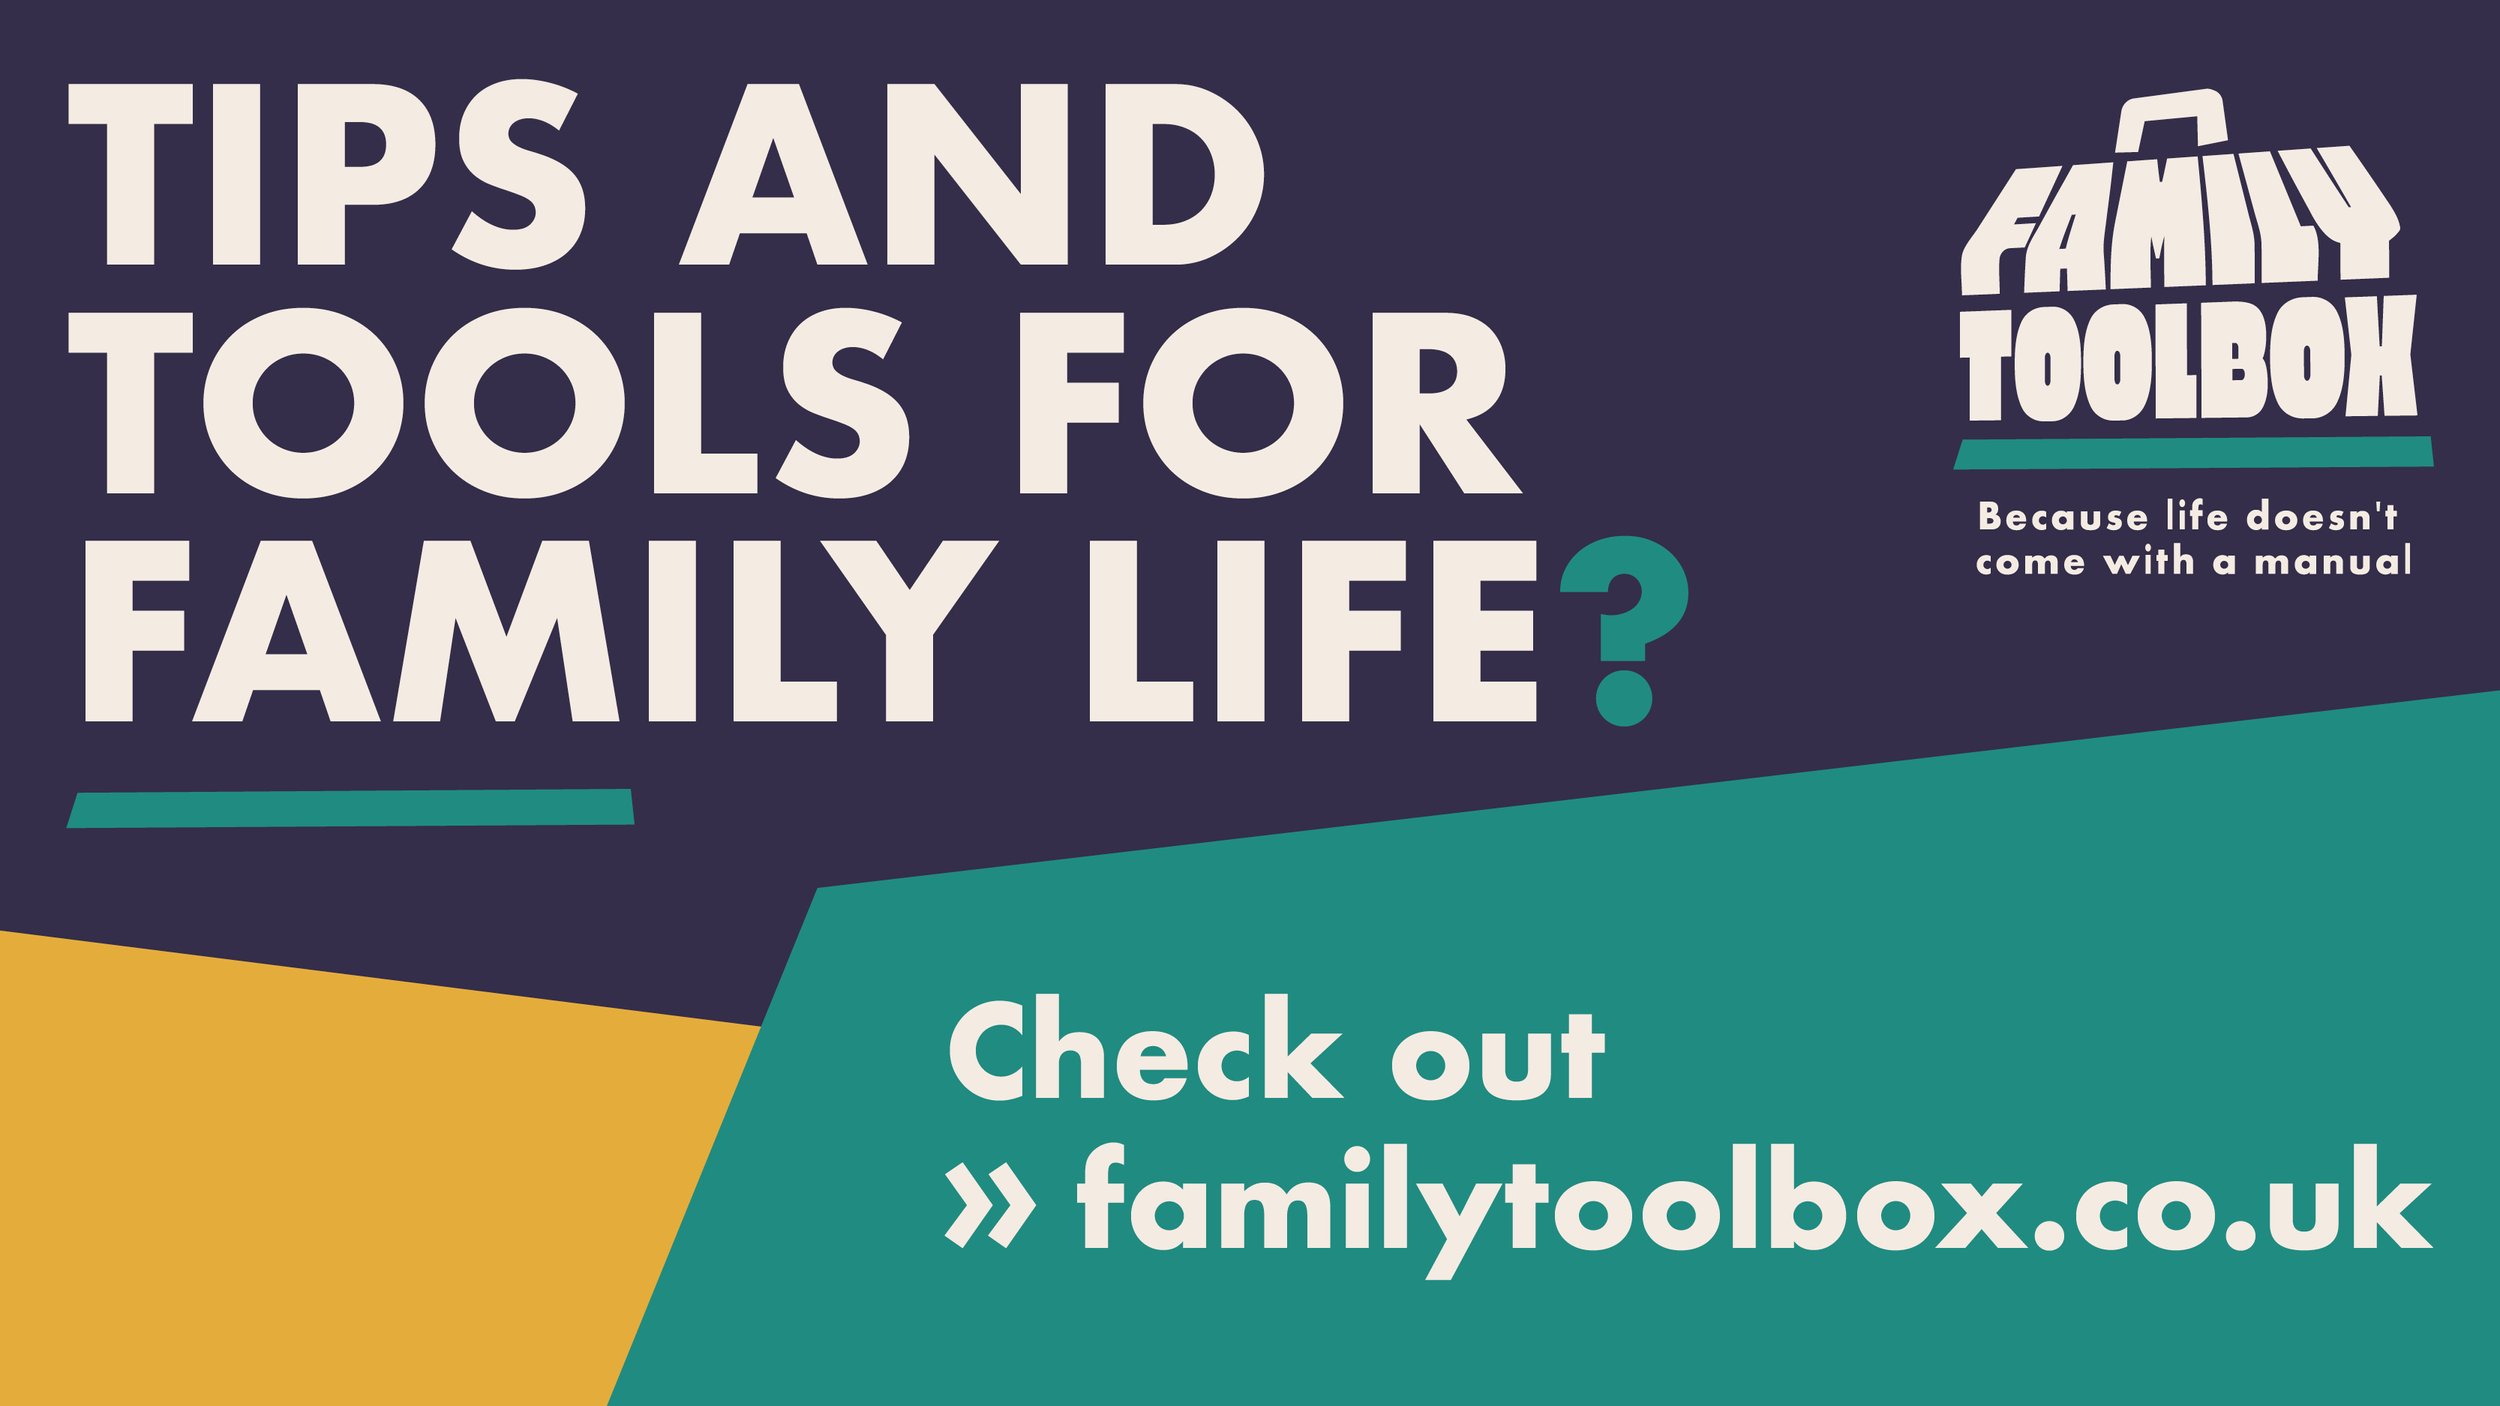 Tips and tools for family life.jpg